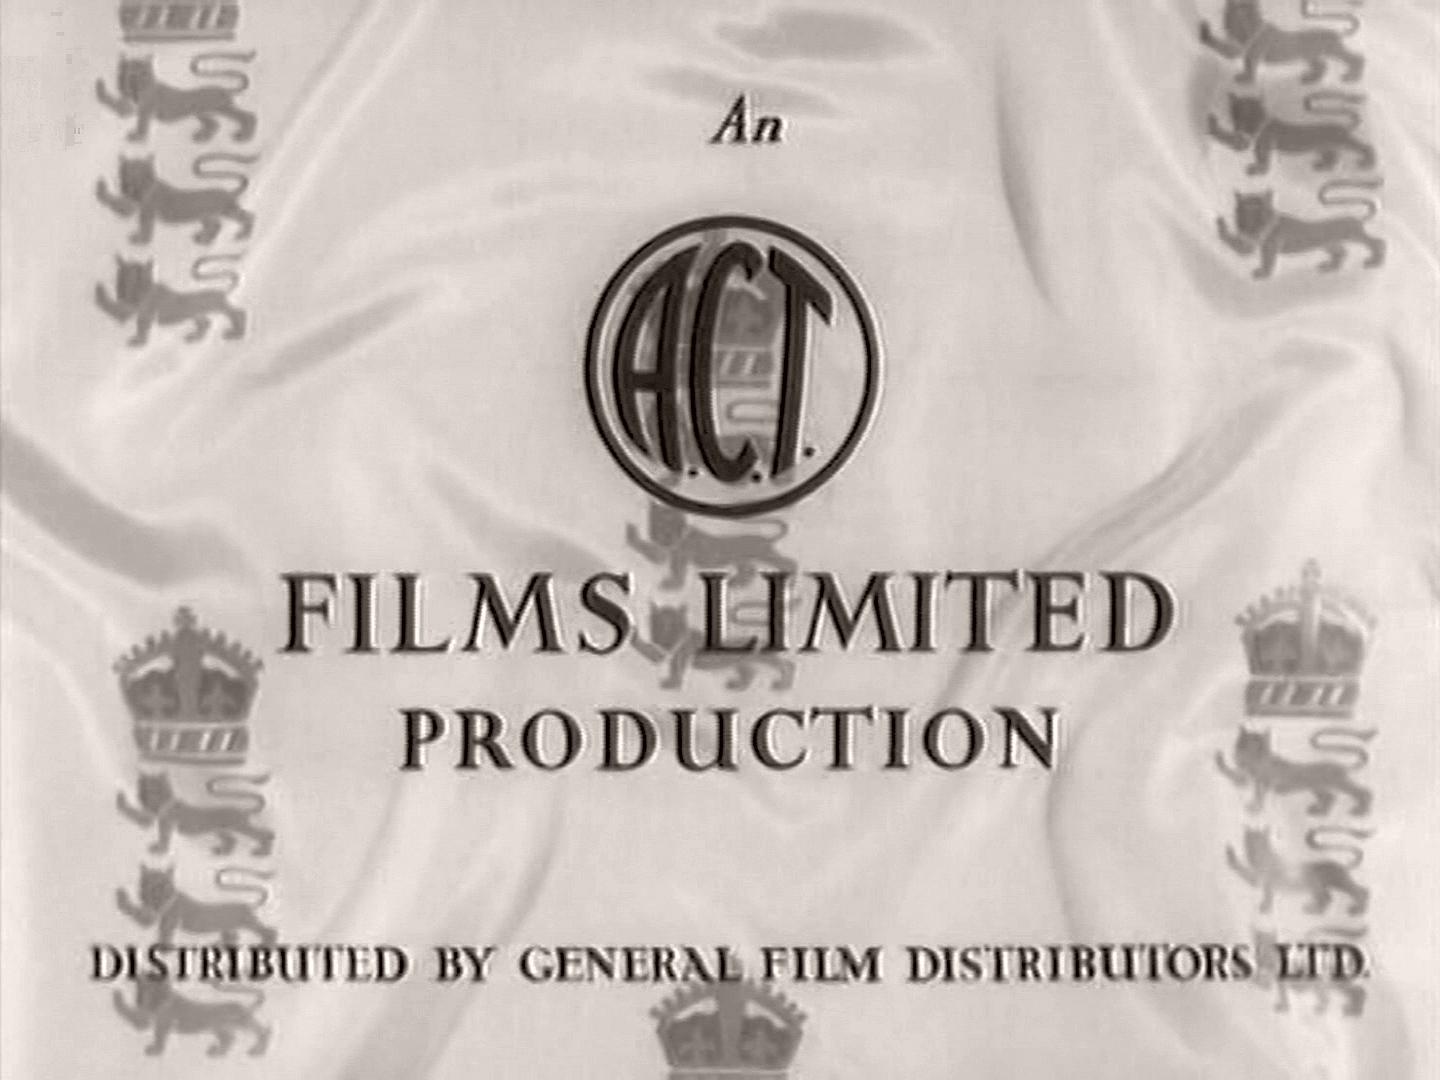 Main title from The Final Test (1953) (2).  An ACT Films Limited production.  Distributed by General Film Distributors Ltd